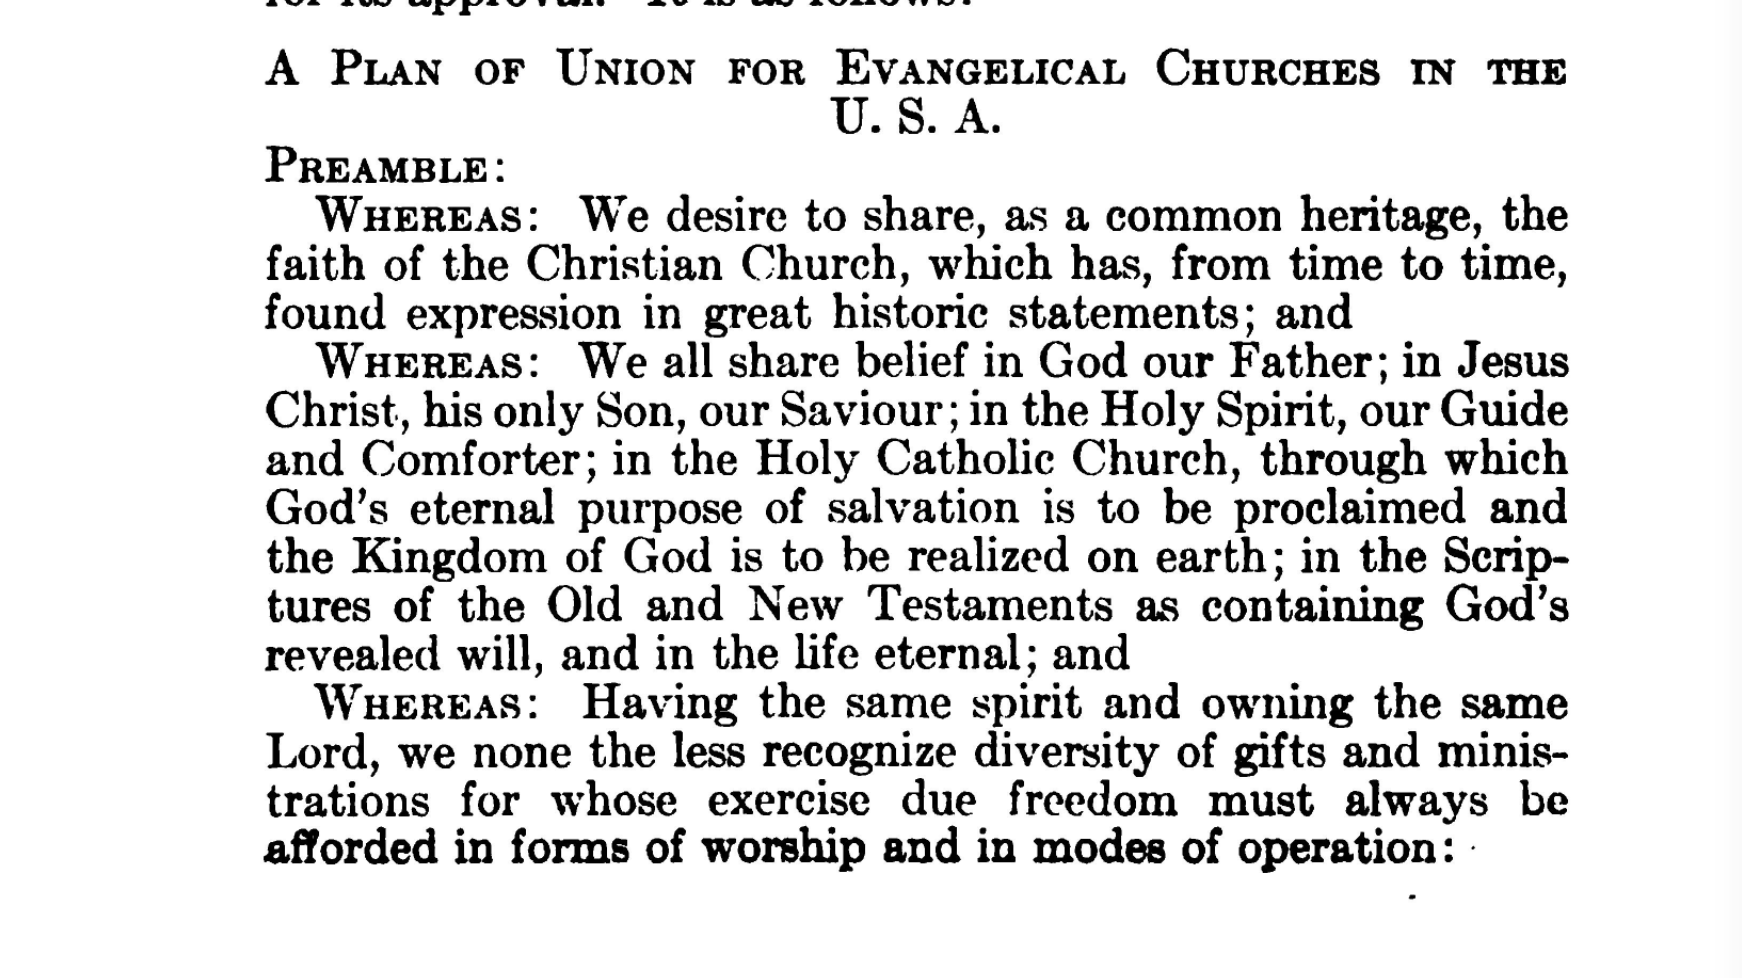 In 1920, the PCUSA almost joined a nation-wide union denomination of Methodists, Episcopals, Moravian, baptists, and more